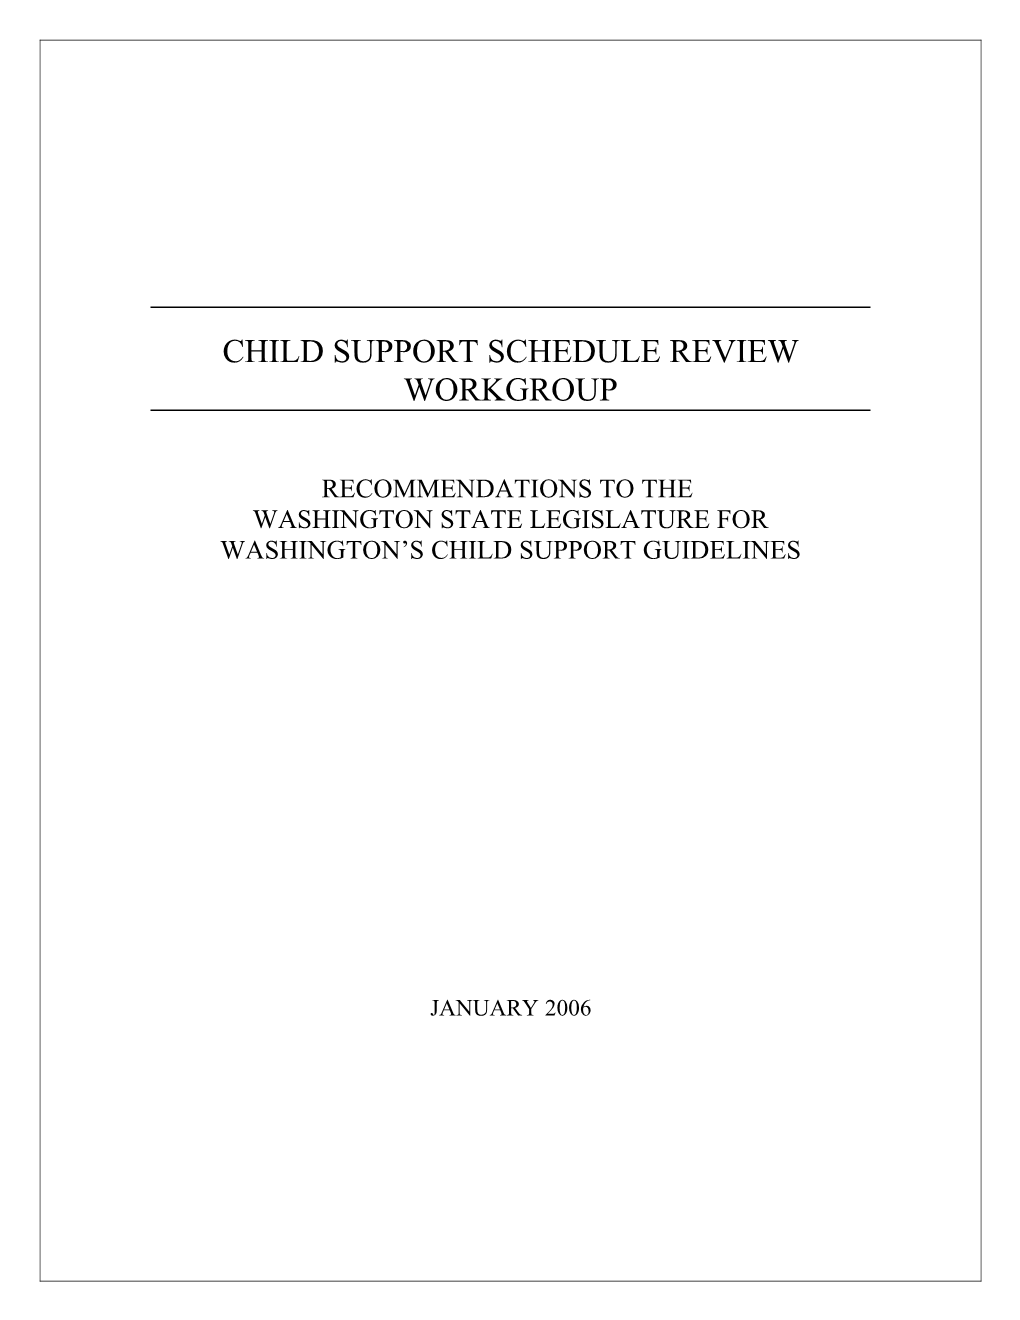 Child Support Schedule Review Report